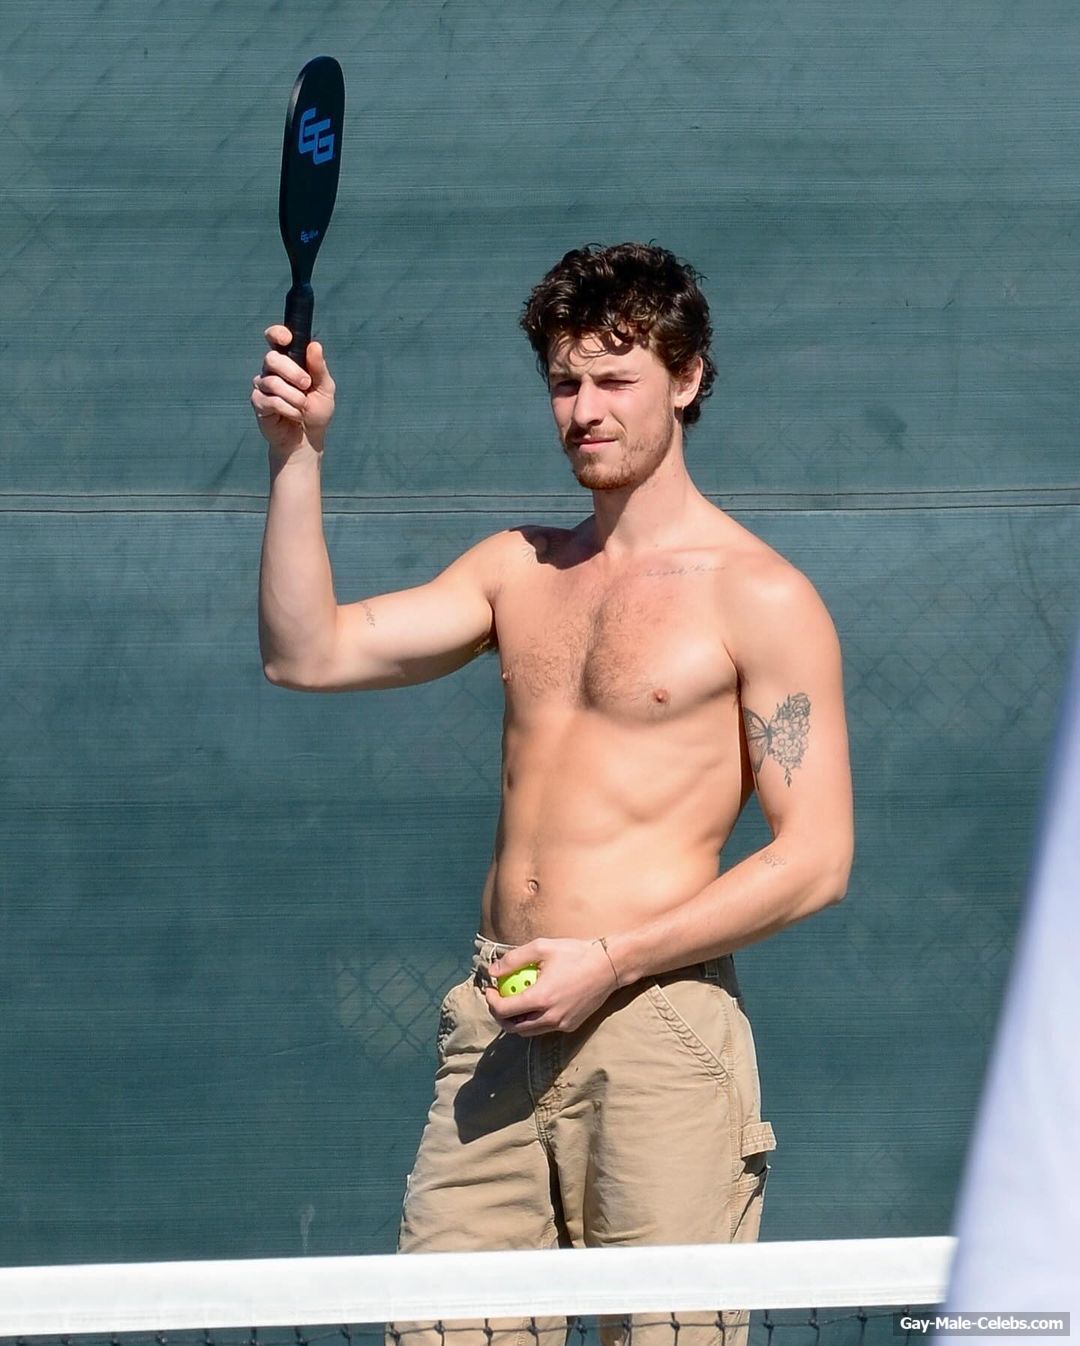 Shawn Mendes Shows His Nude Torso During Tennis